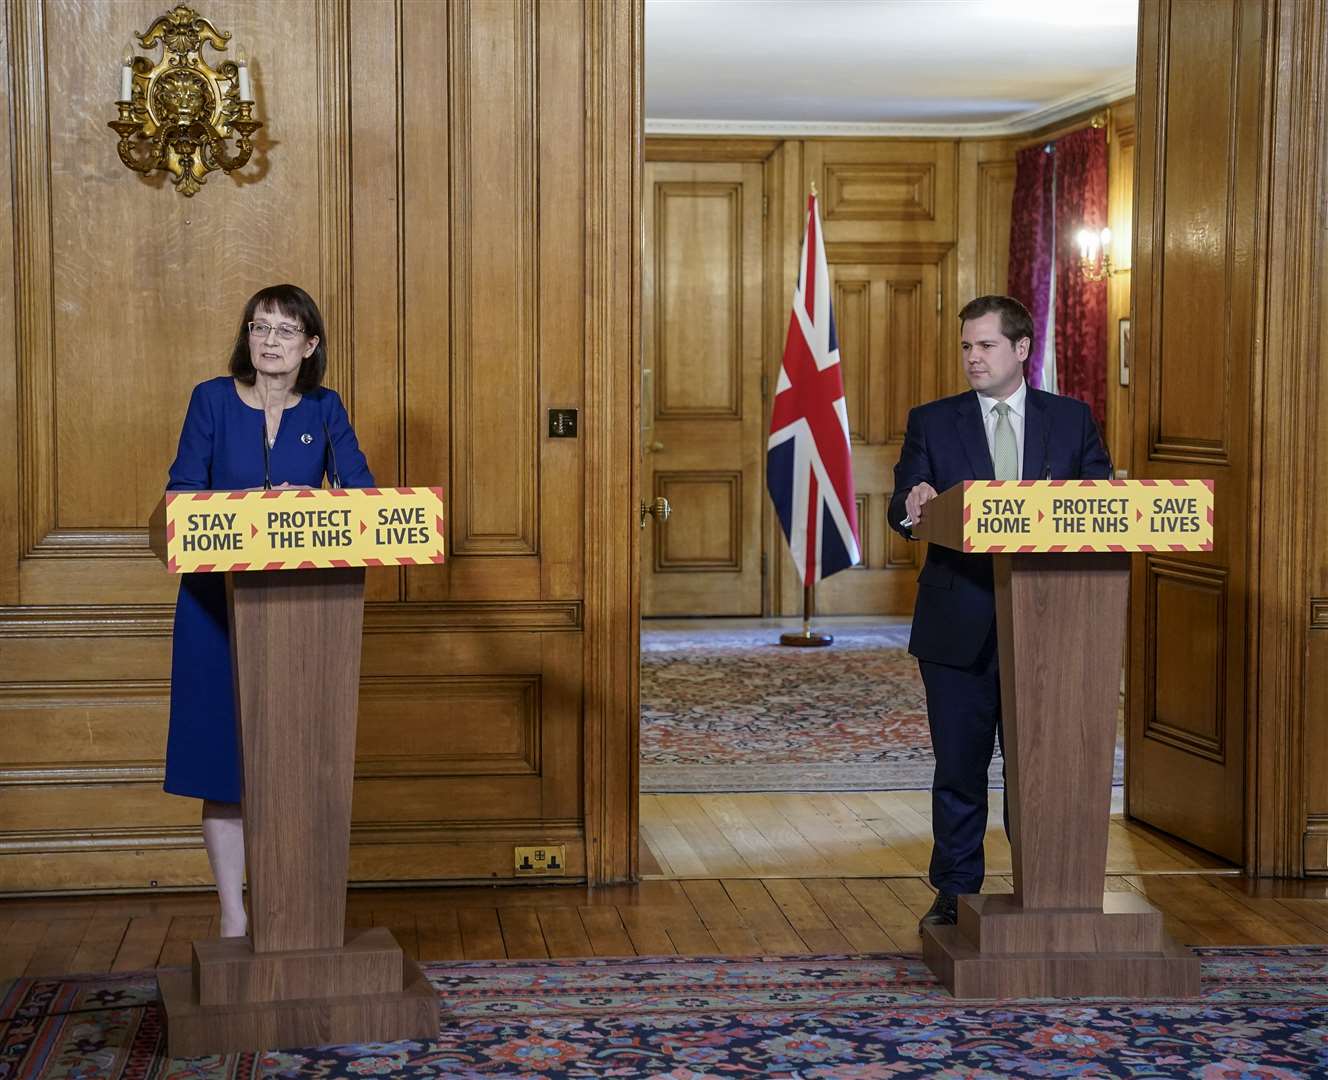 Handout photo issued by 10 Downing Street of Deputy Chief Medical Officer Dr Jenny Harries and Housing, Communities and Local Government Secretary Robert Jenrick during a media briefing in Downing Street (Andrew Parsons/Downing Street/PA)